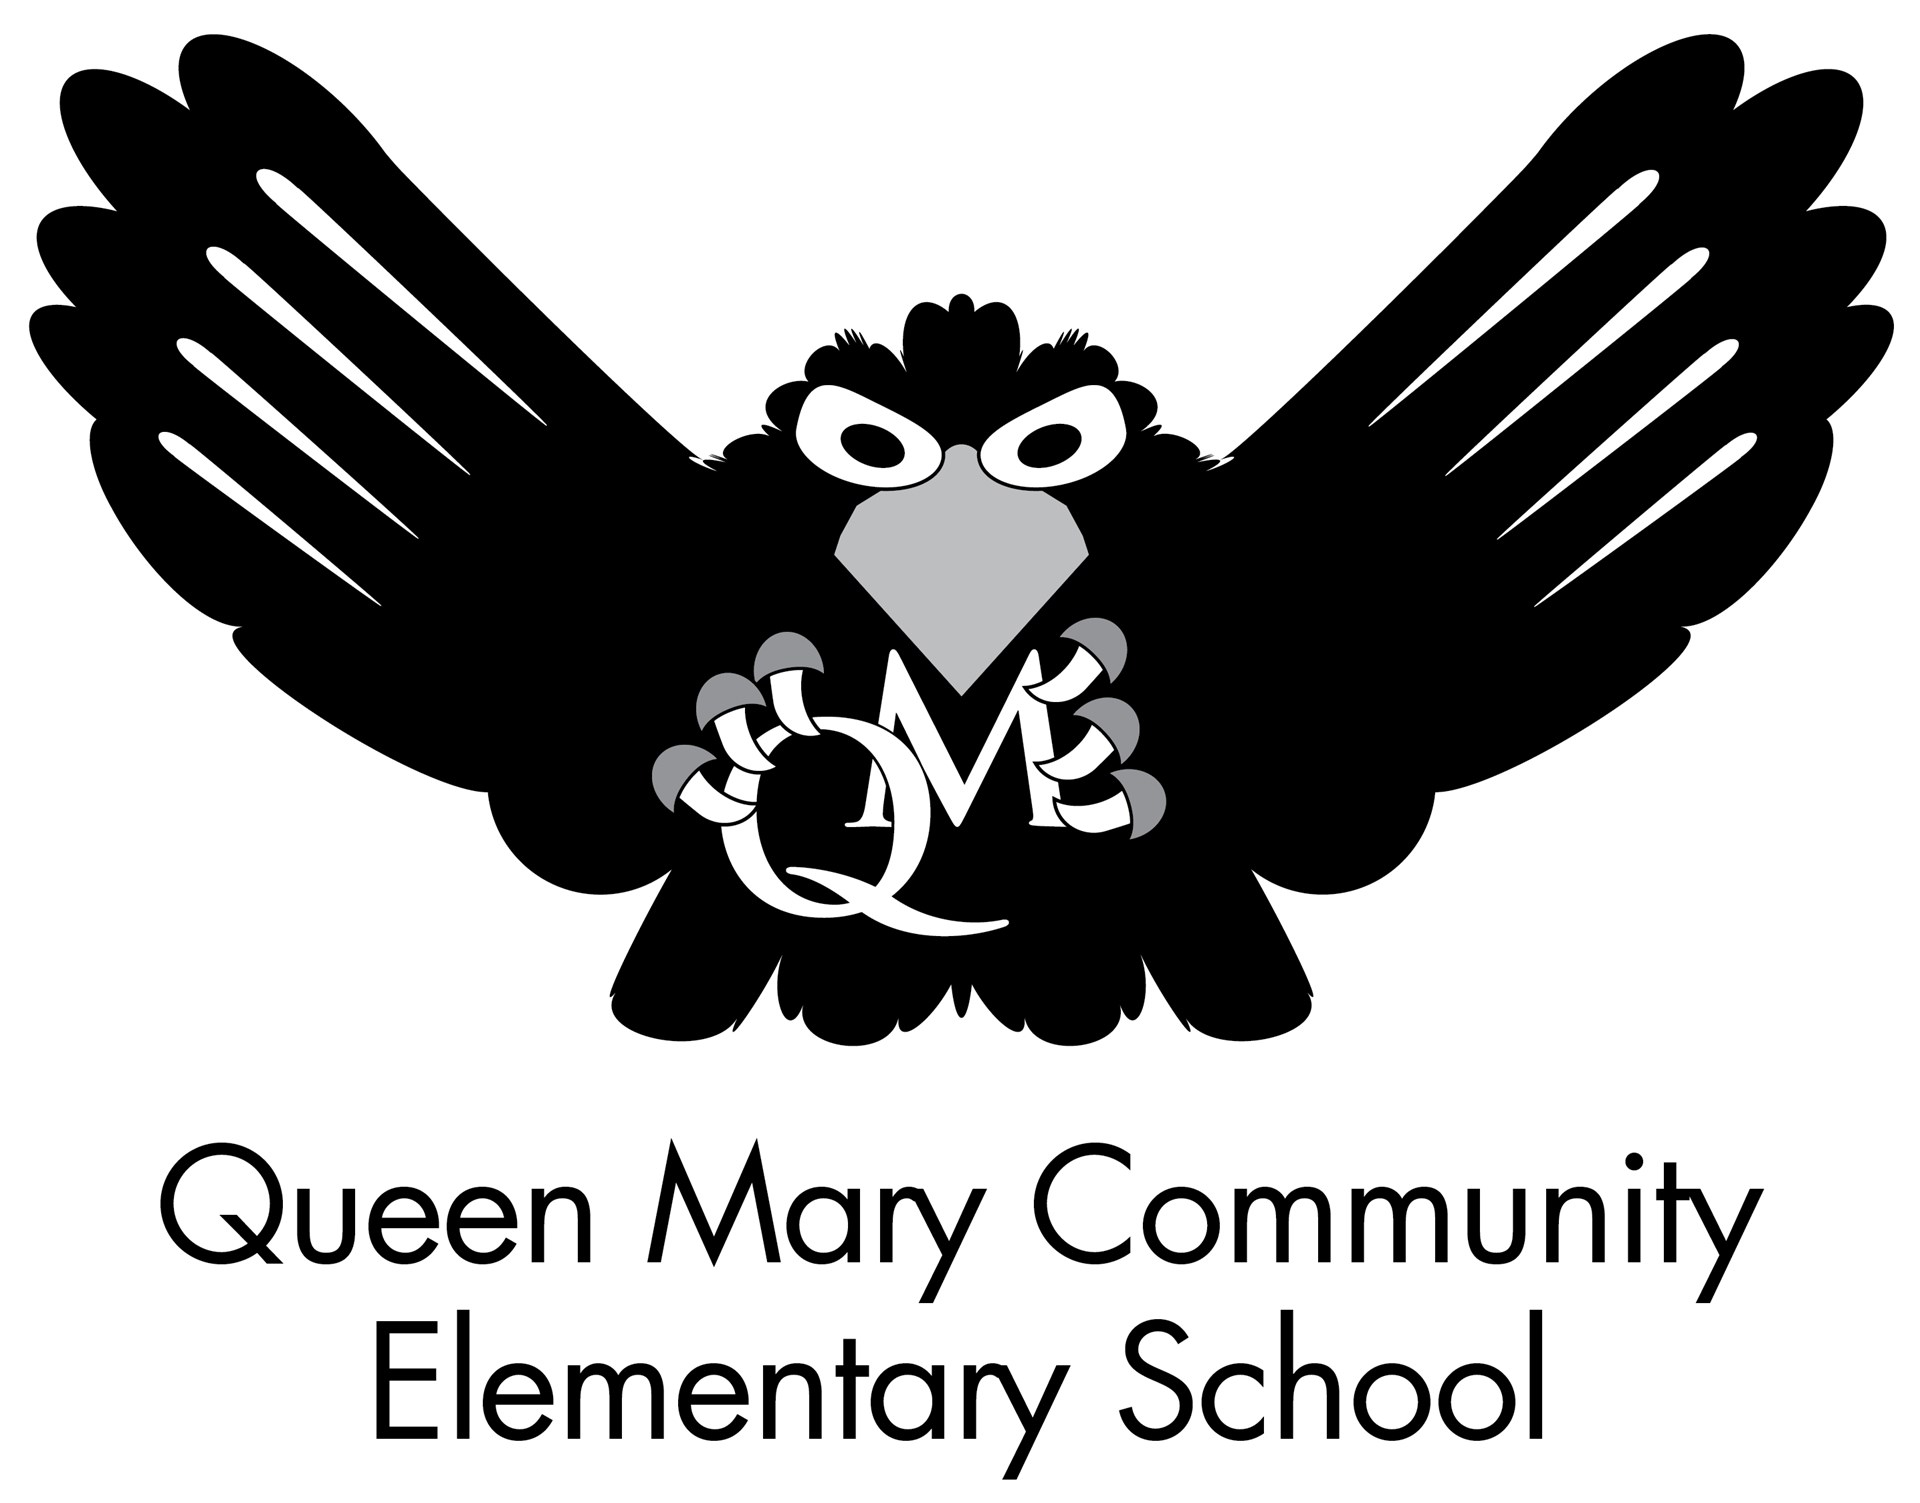 Queen Mary-Eagle logo revised-1.jpg